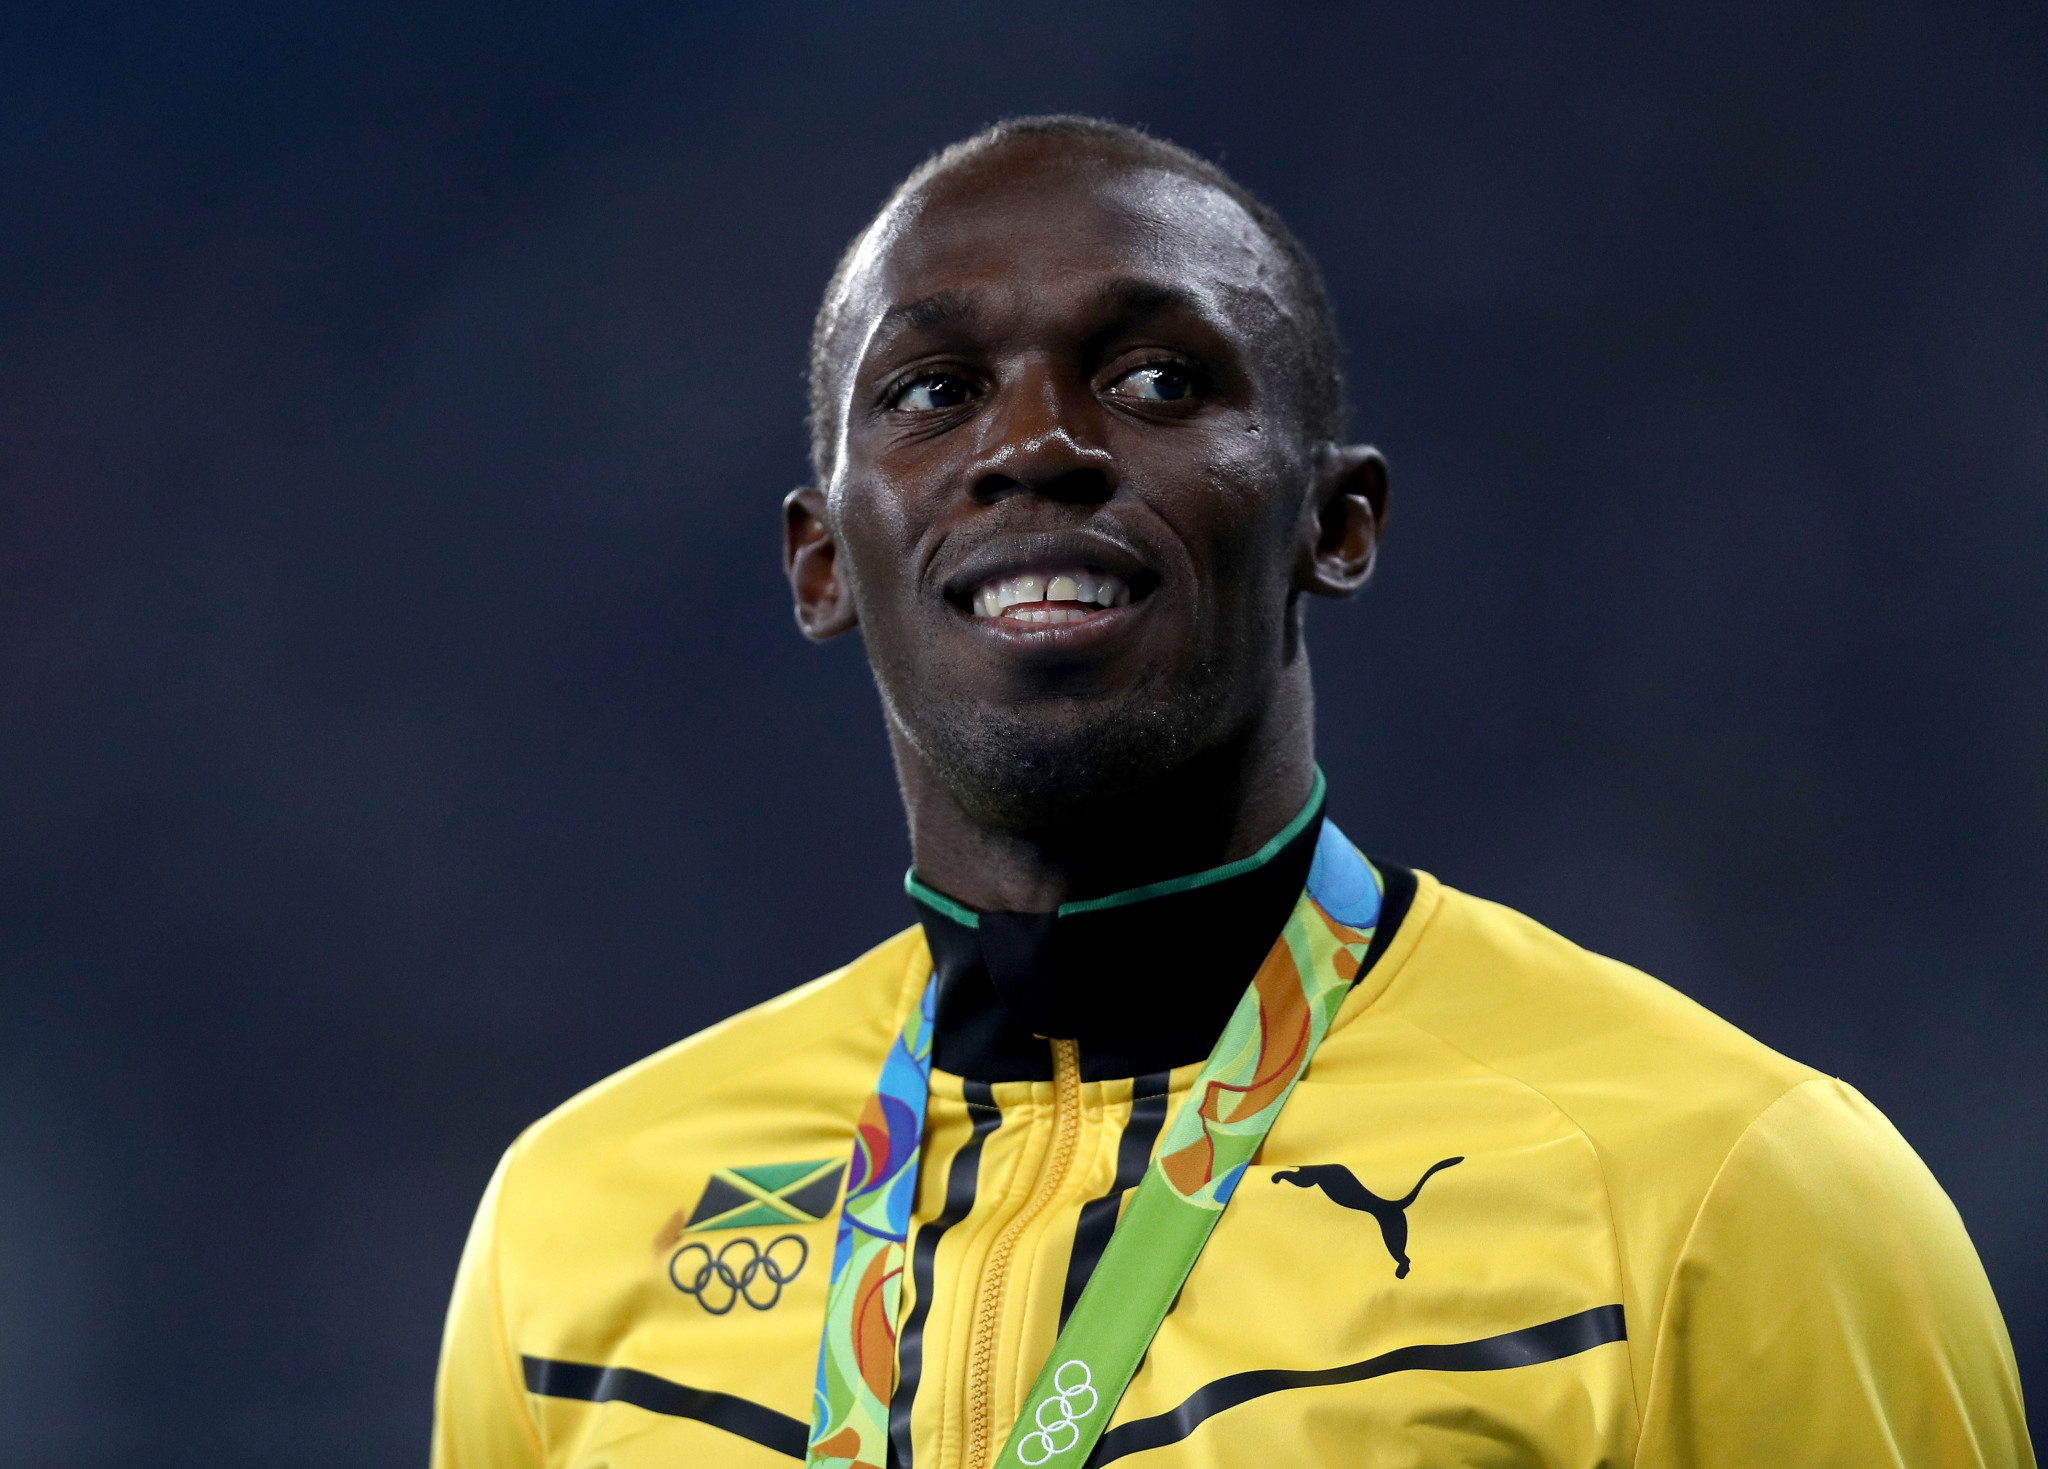 Eight-time Olympic champion Bolt joins esports organisation WYLDE as co-owner